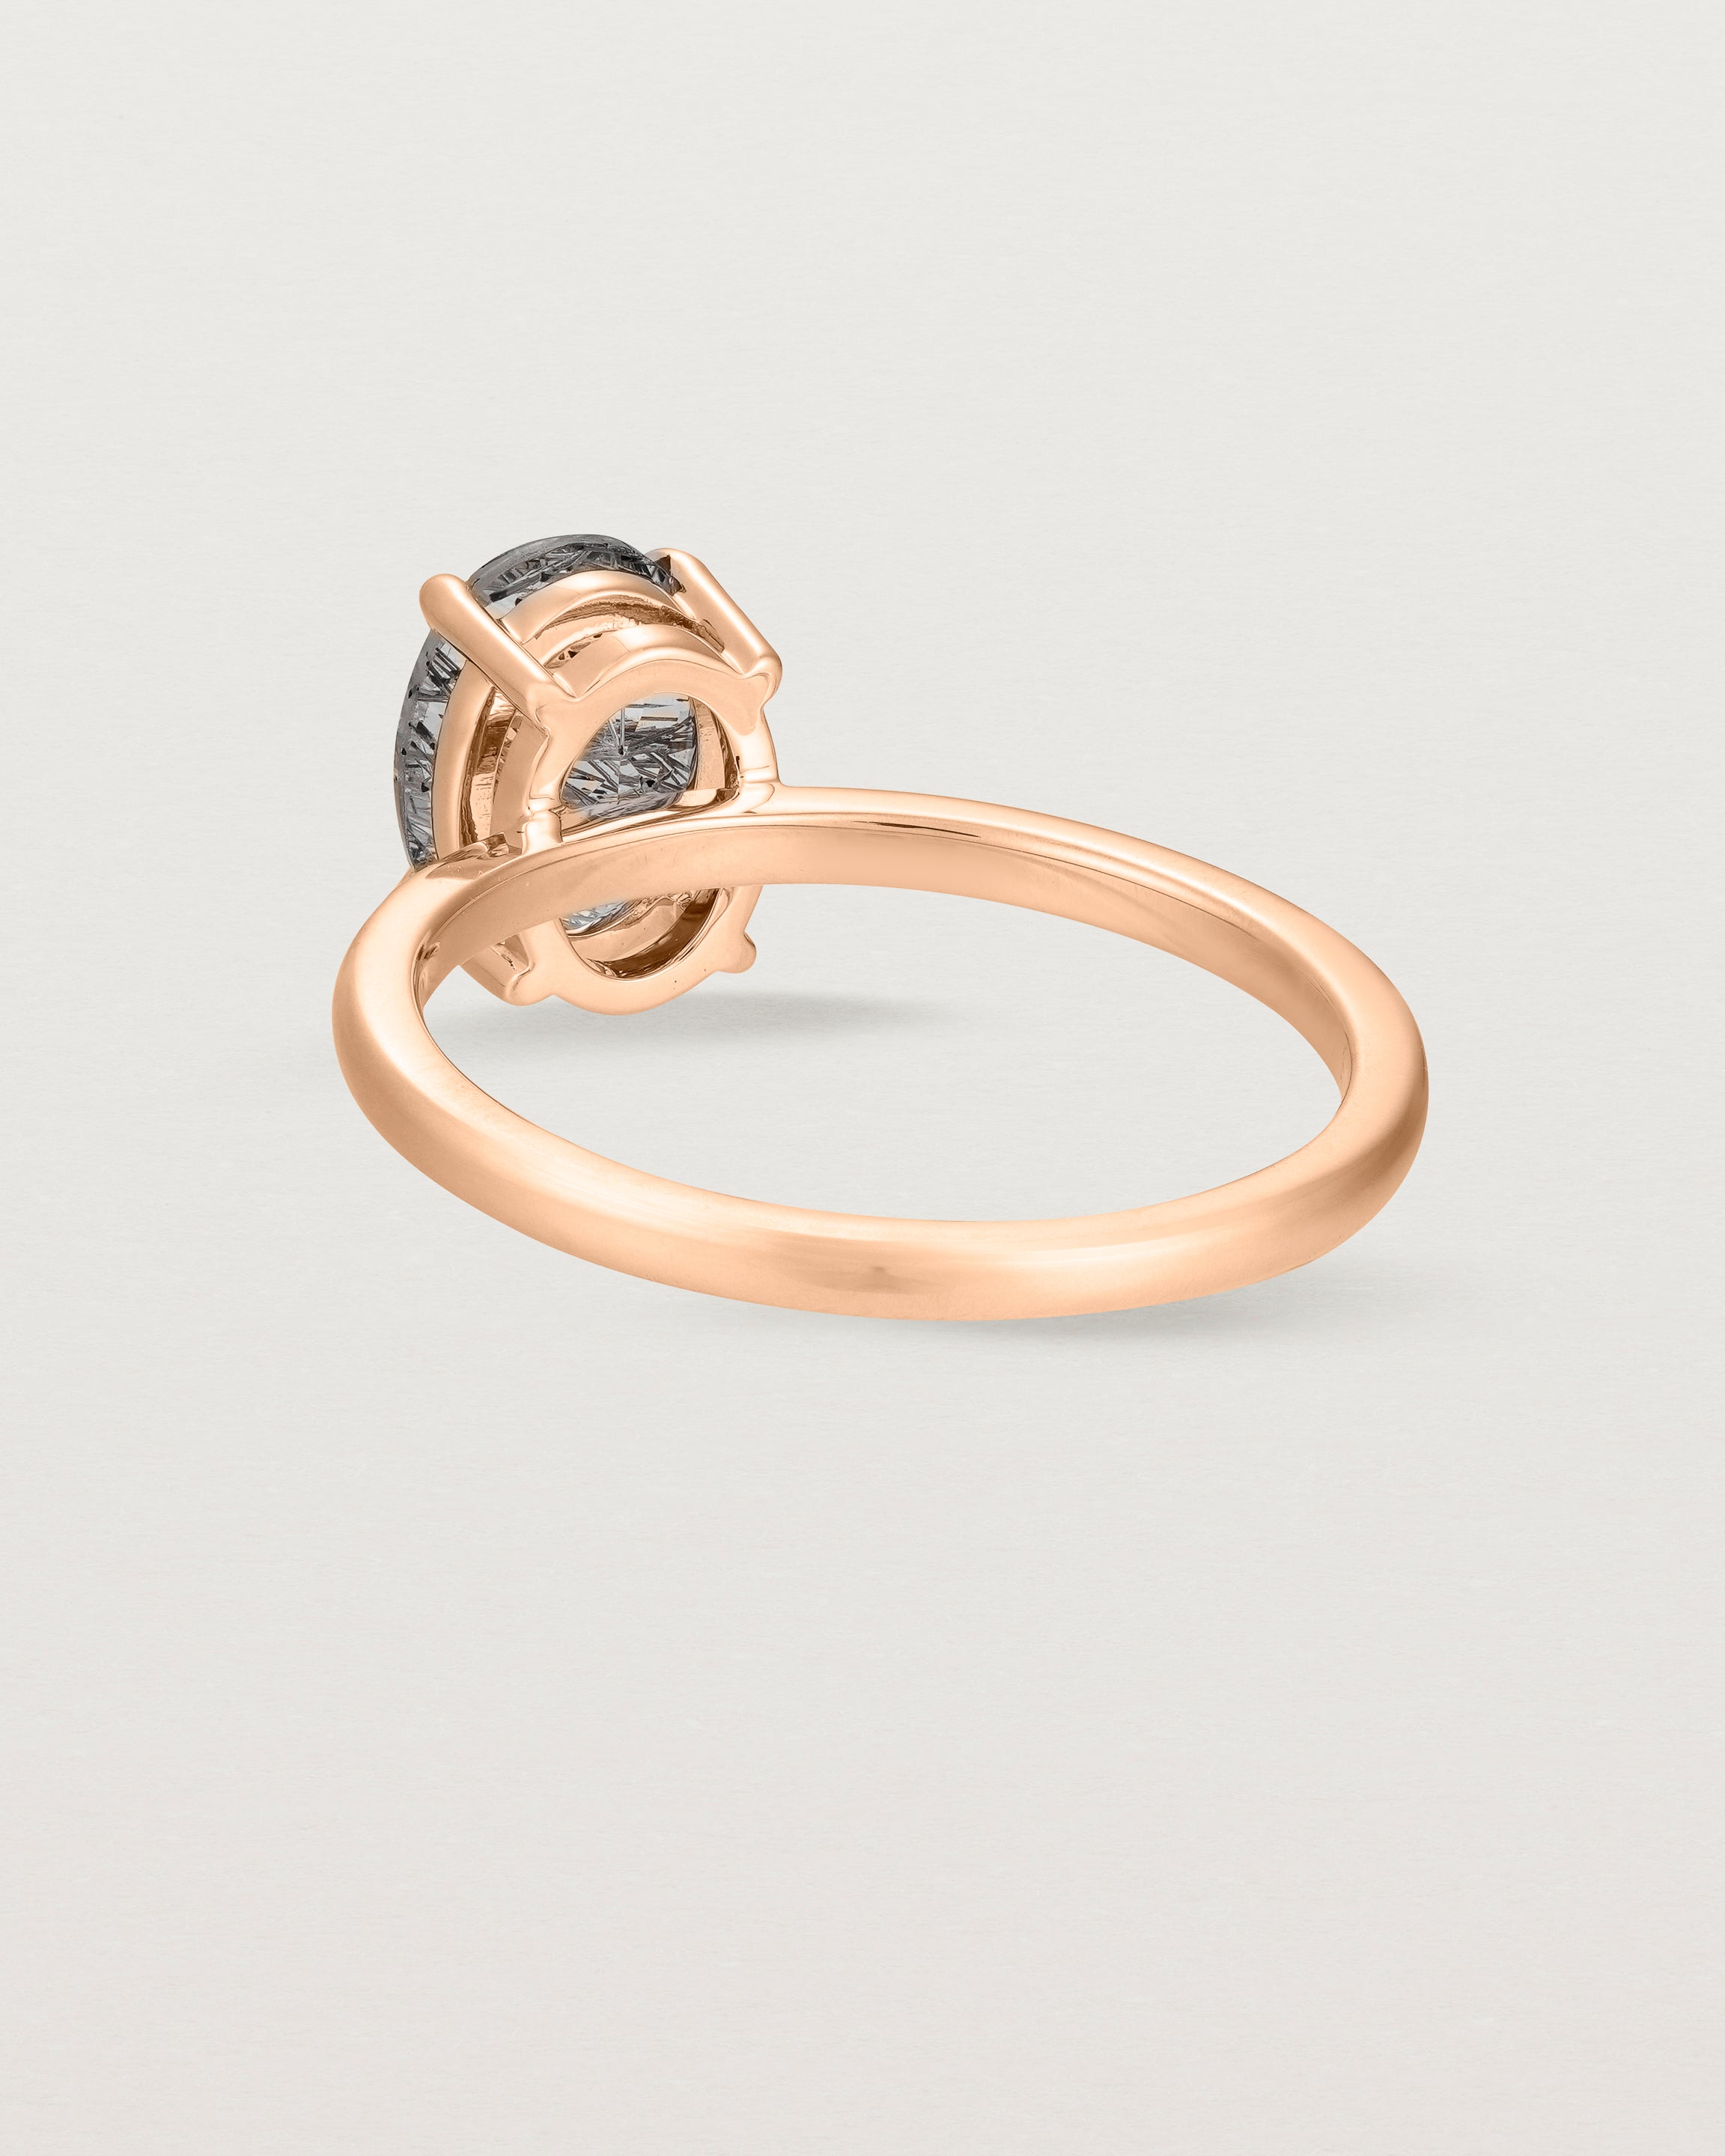 Back view of the Una Oval Solitaire | Tourmalinated Quartz | Rose Gold.